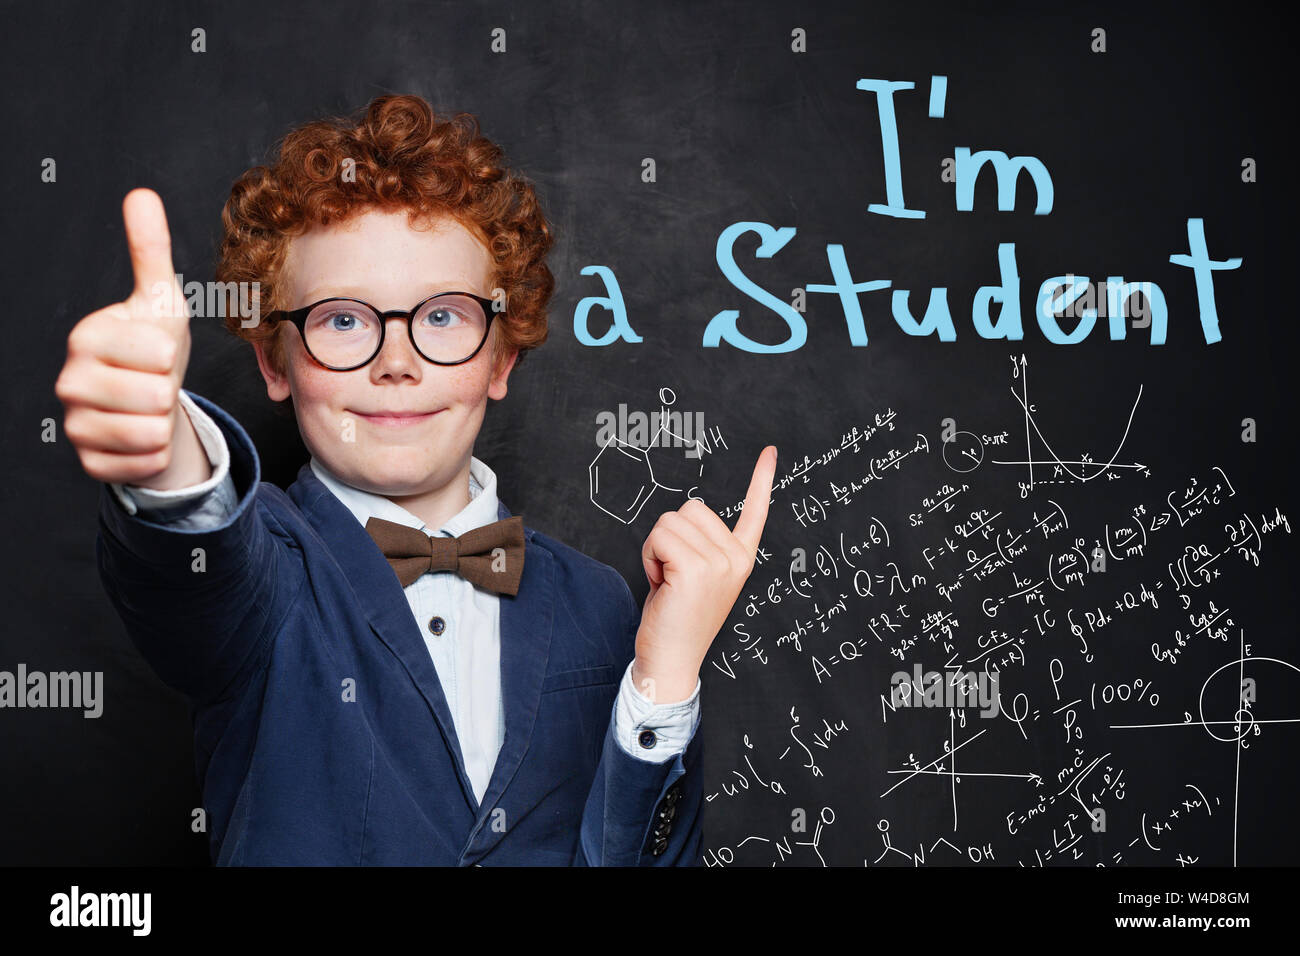 Happy curious child boy on blackboard background with science and maths formulas Stock Photo